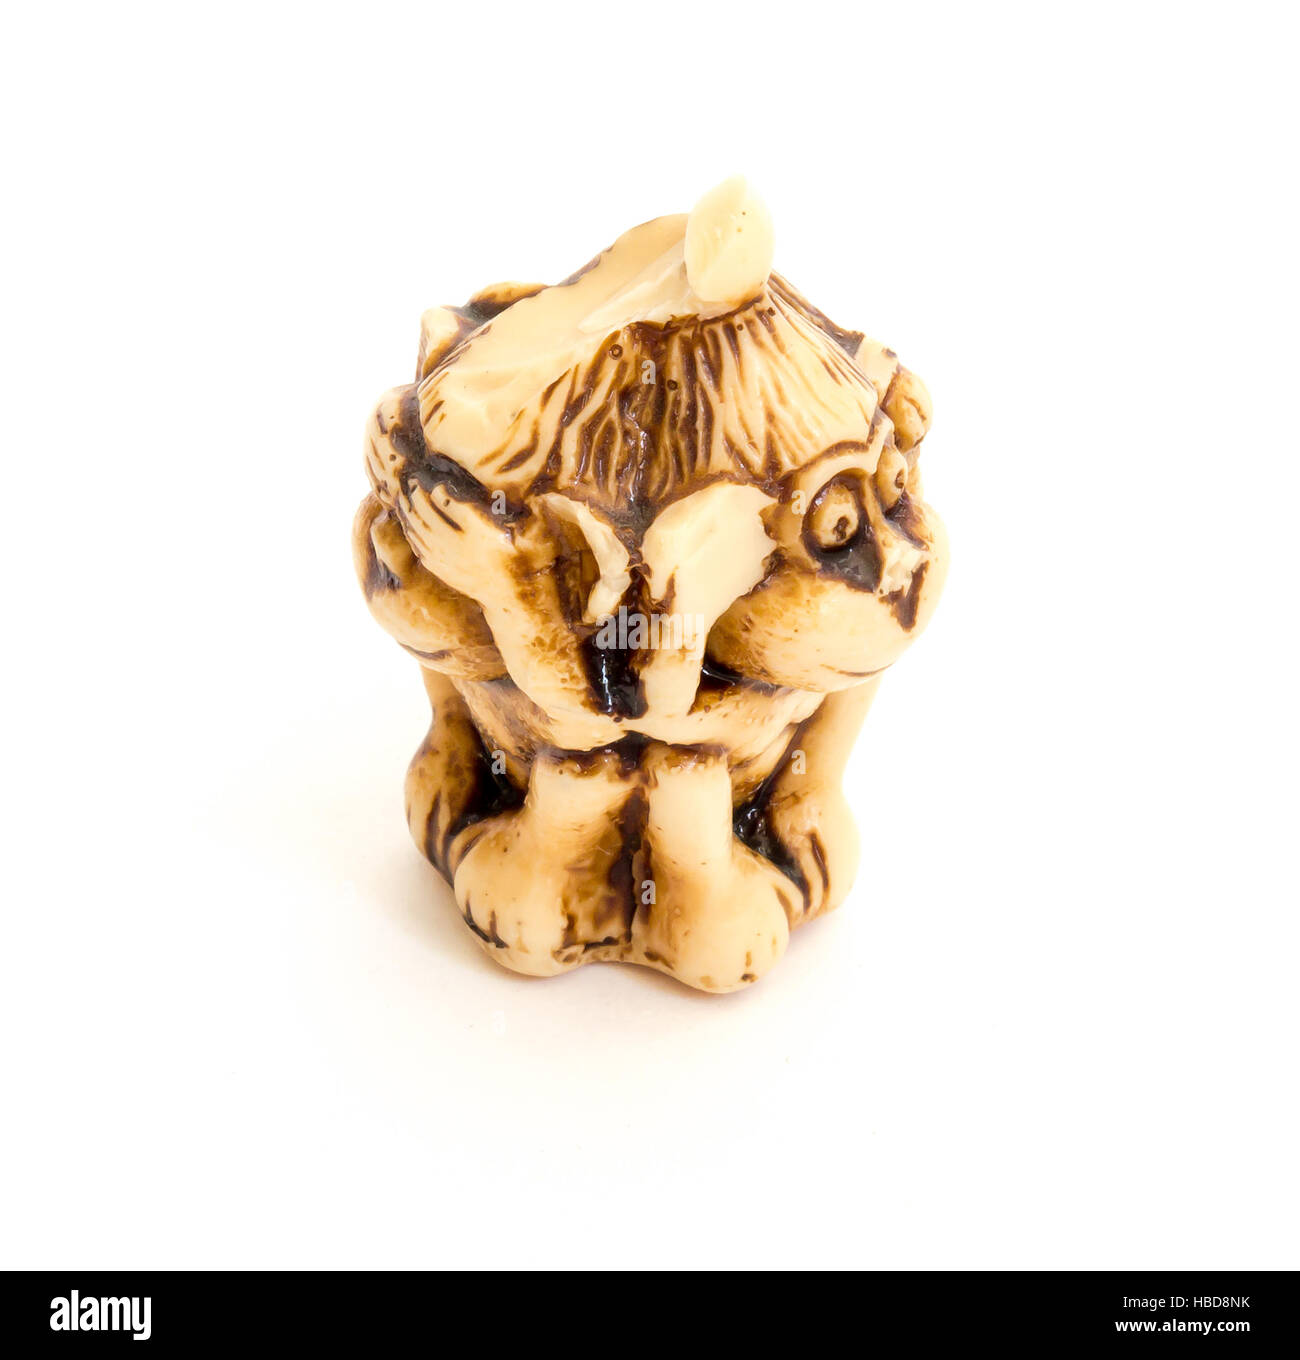 Japanese netsuke Three wise monkeys, sometimes called the three mystic apes, are a pictorial maxim. Stock Photo